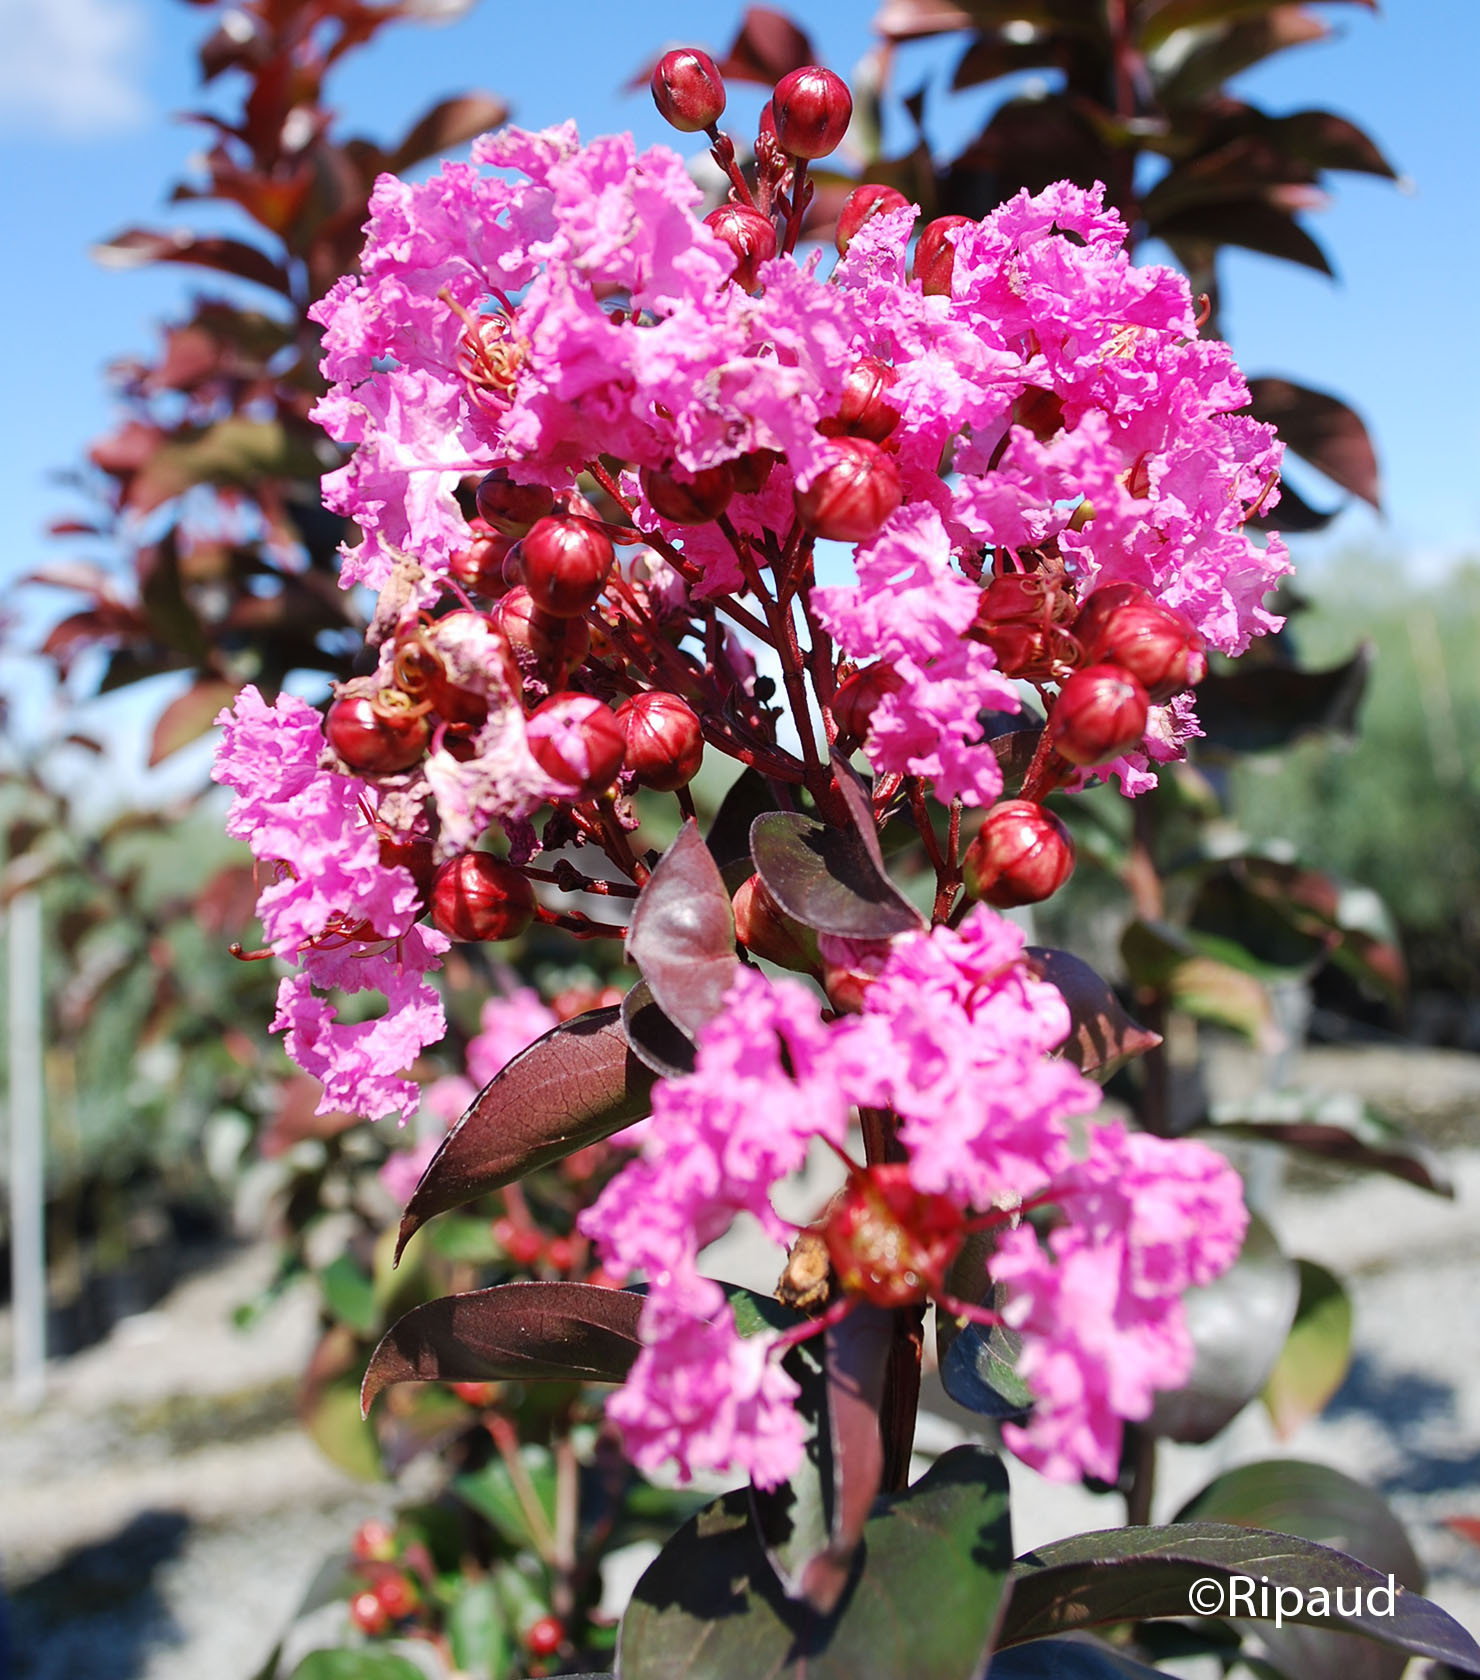 LAGERSTROEMIA indica Rhapsody in pink